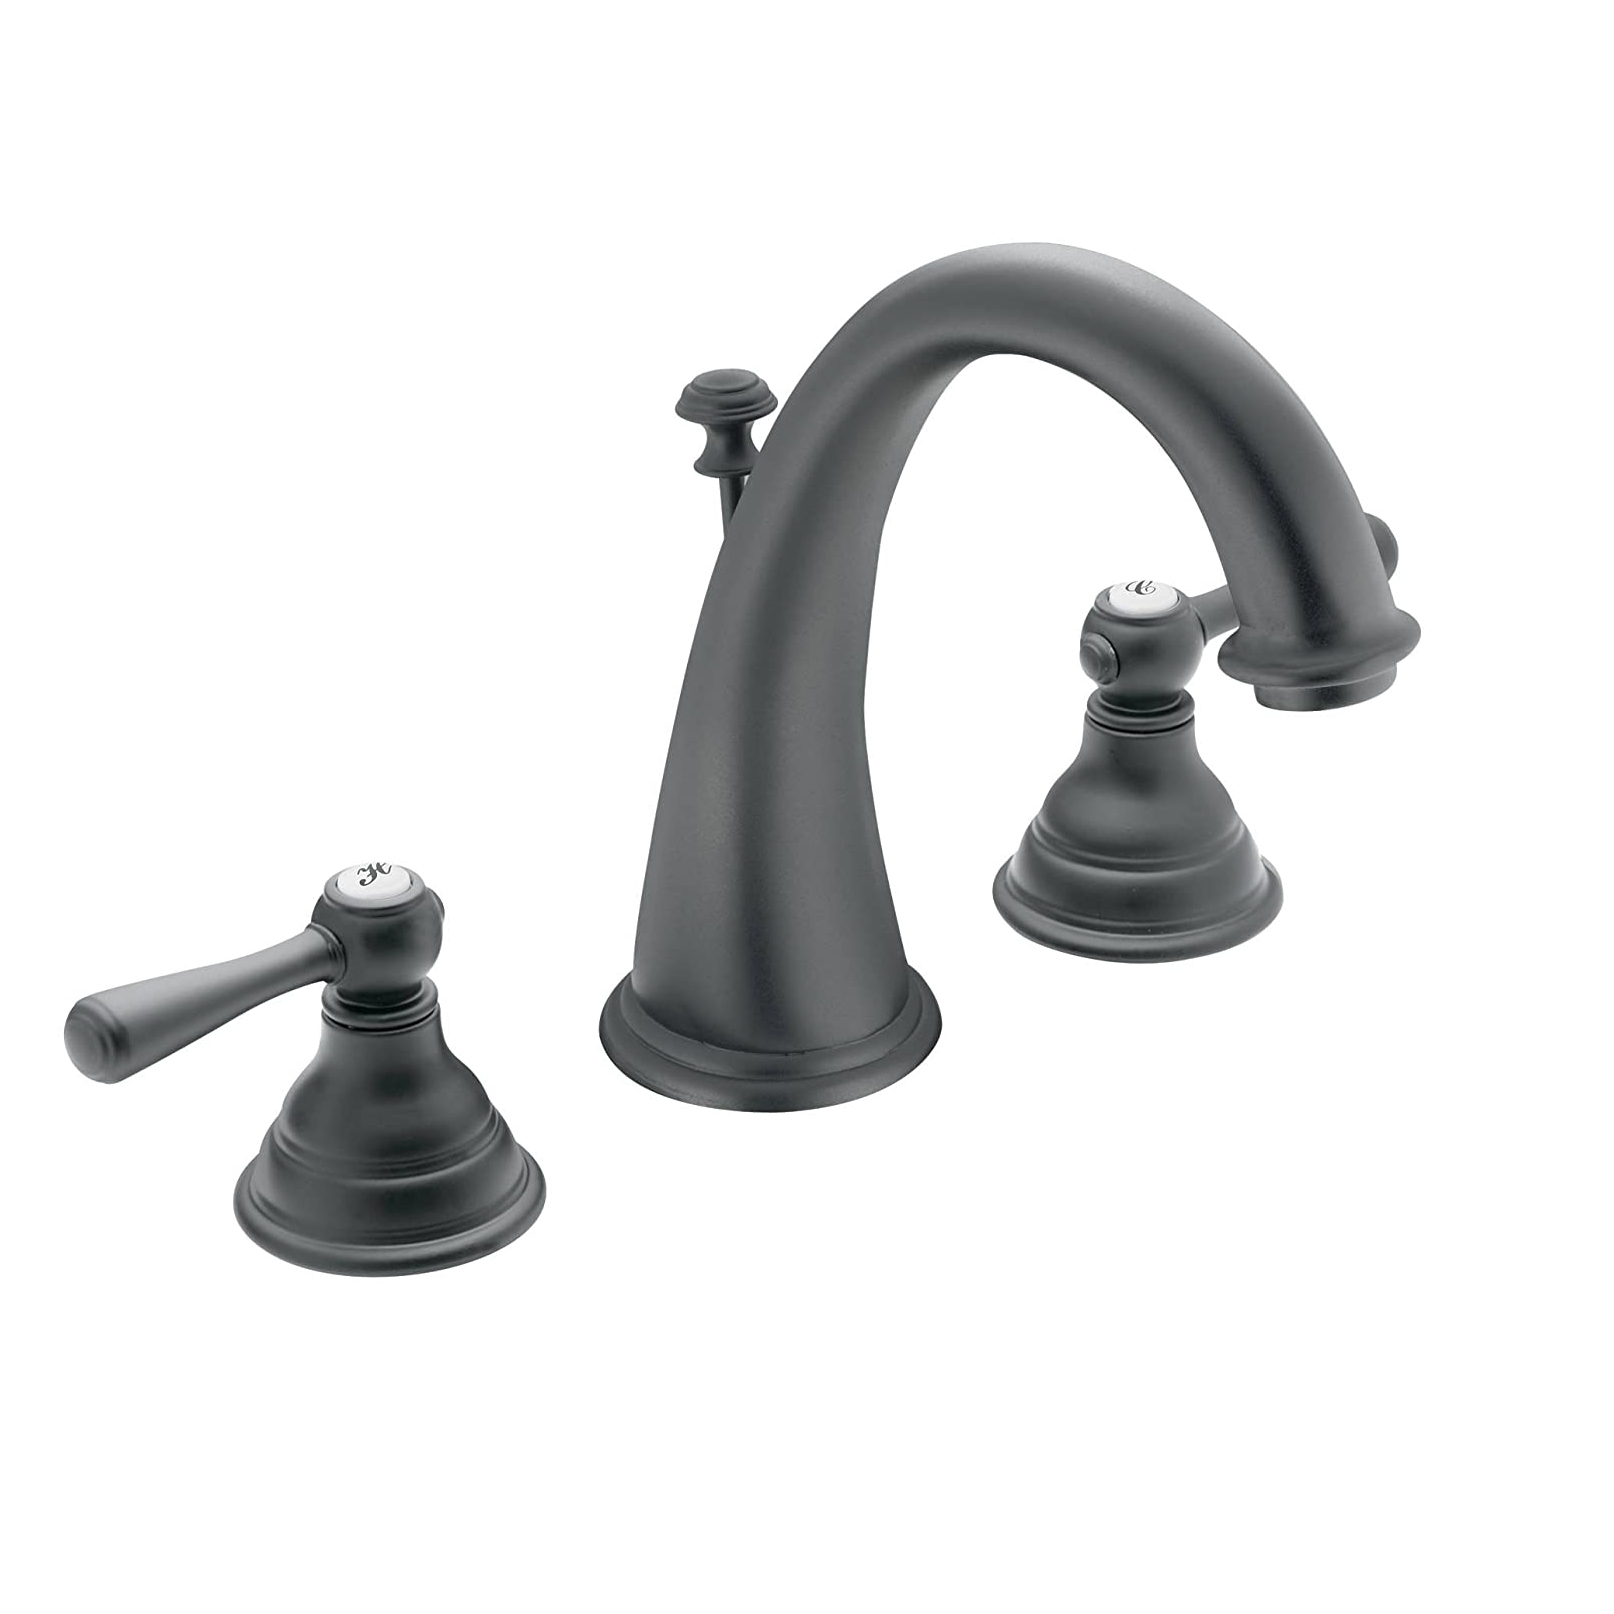 Kingsley Deck Mount Lav Faucet Trim In Wrought Iron